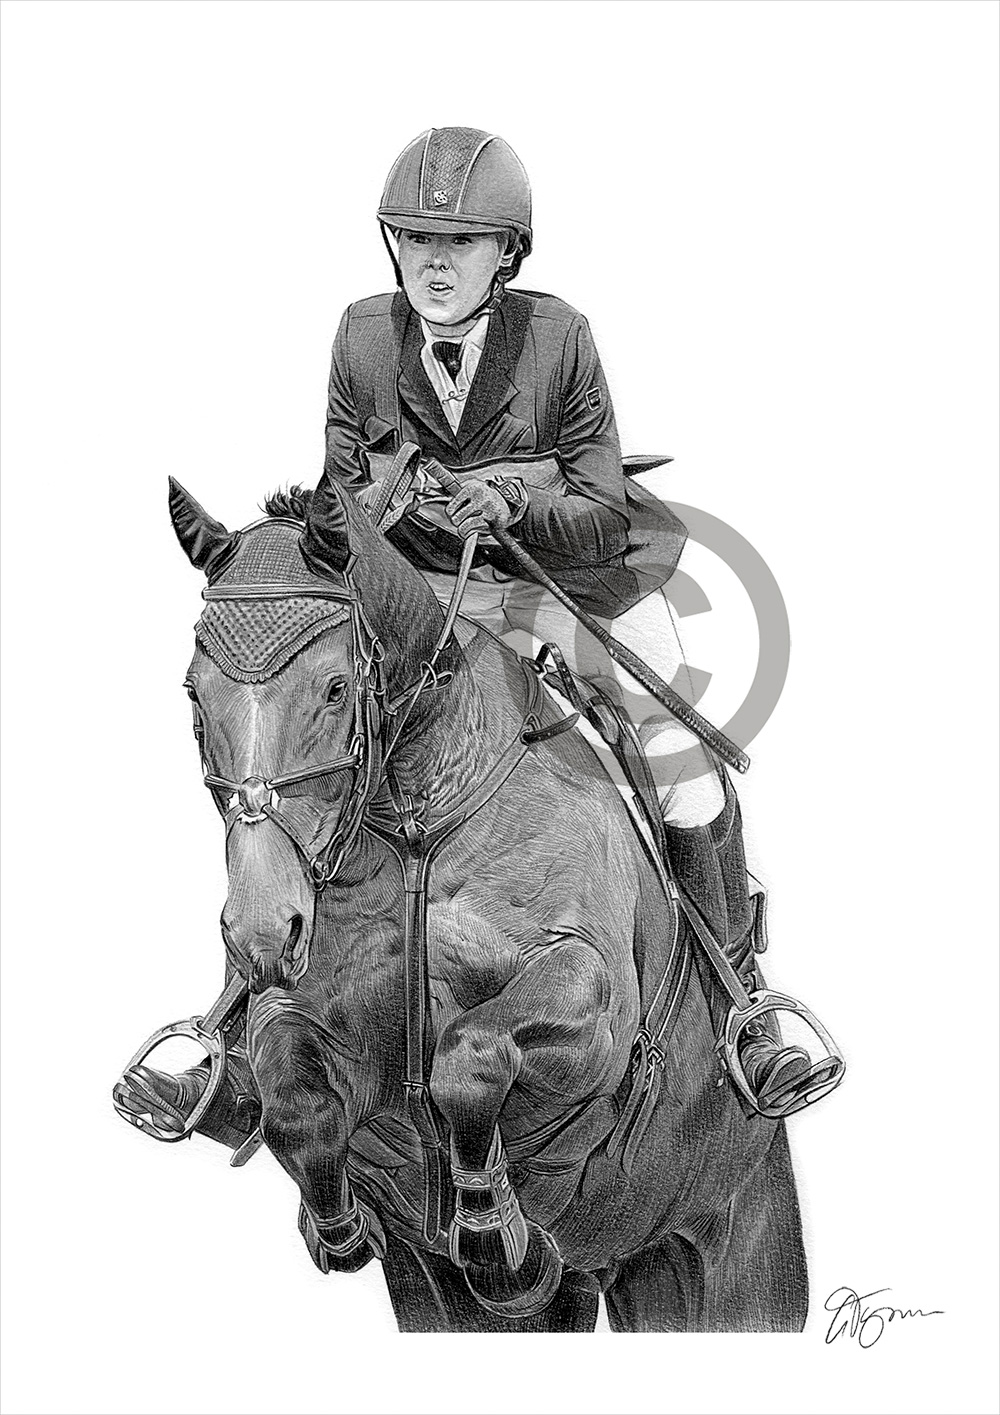 Pencil drawing commission of a horse and rider by artist Gary Tymon